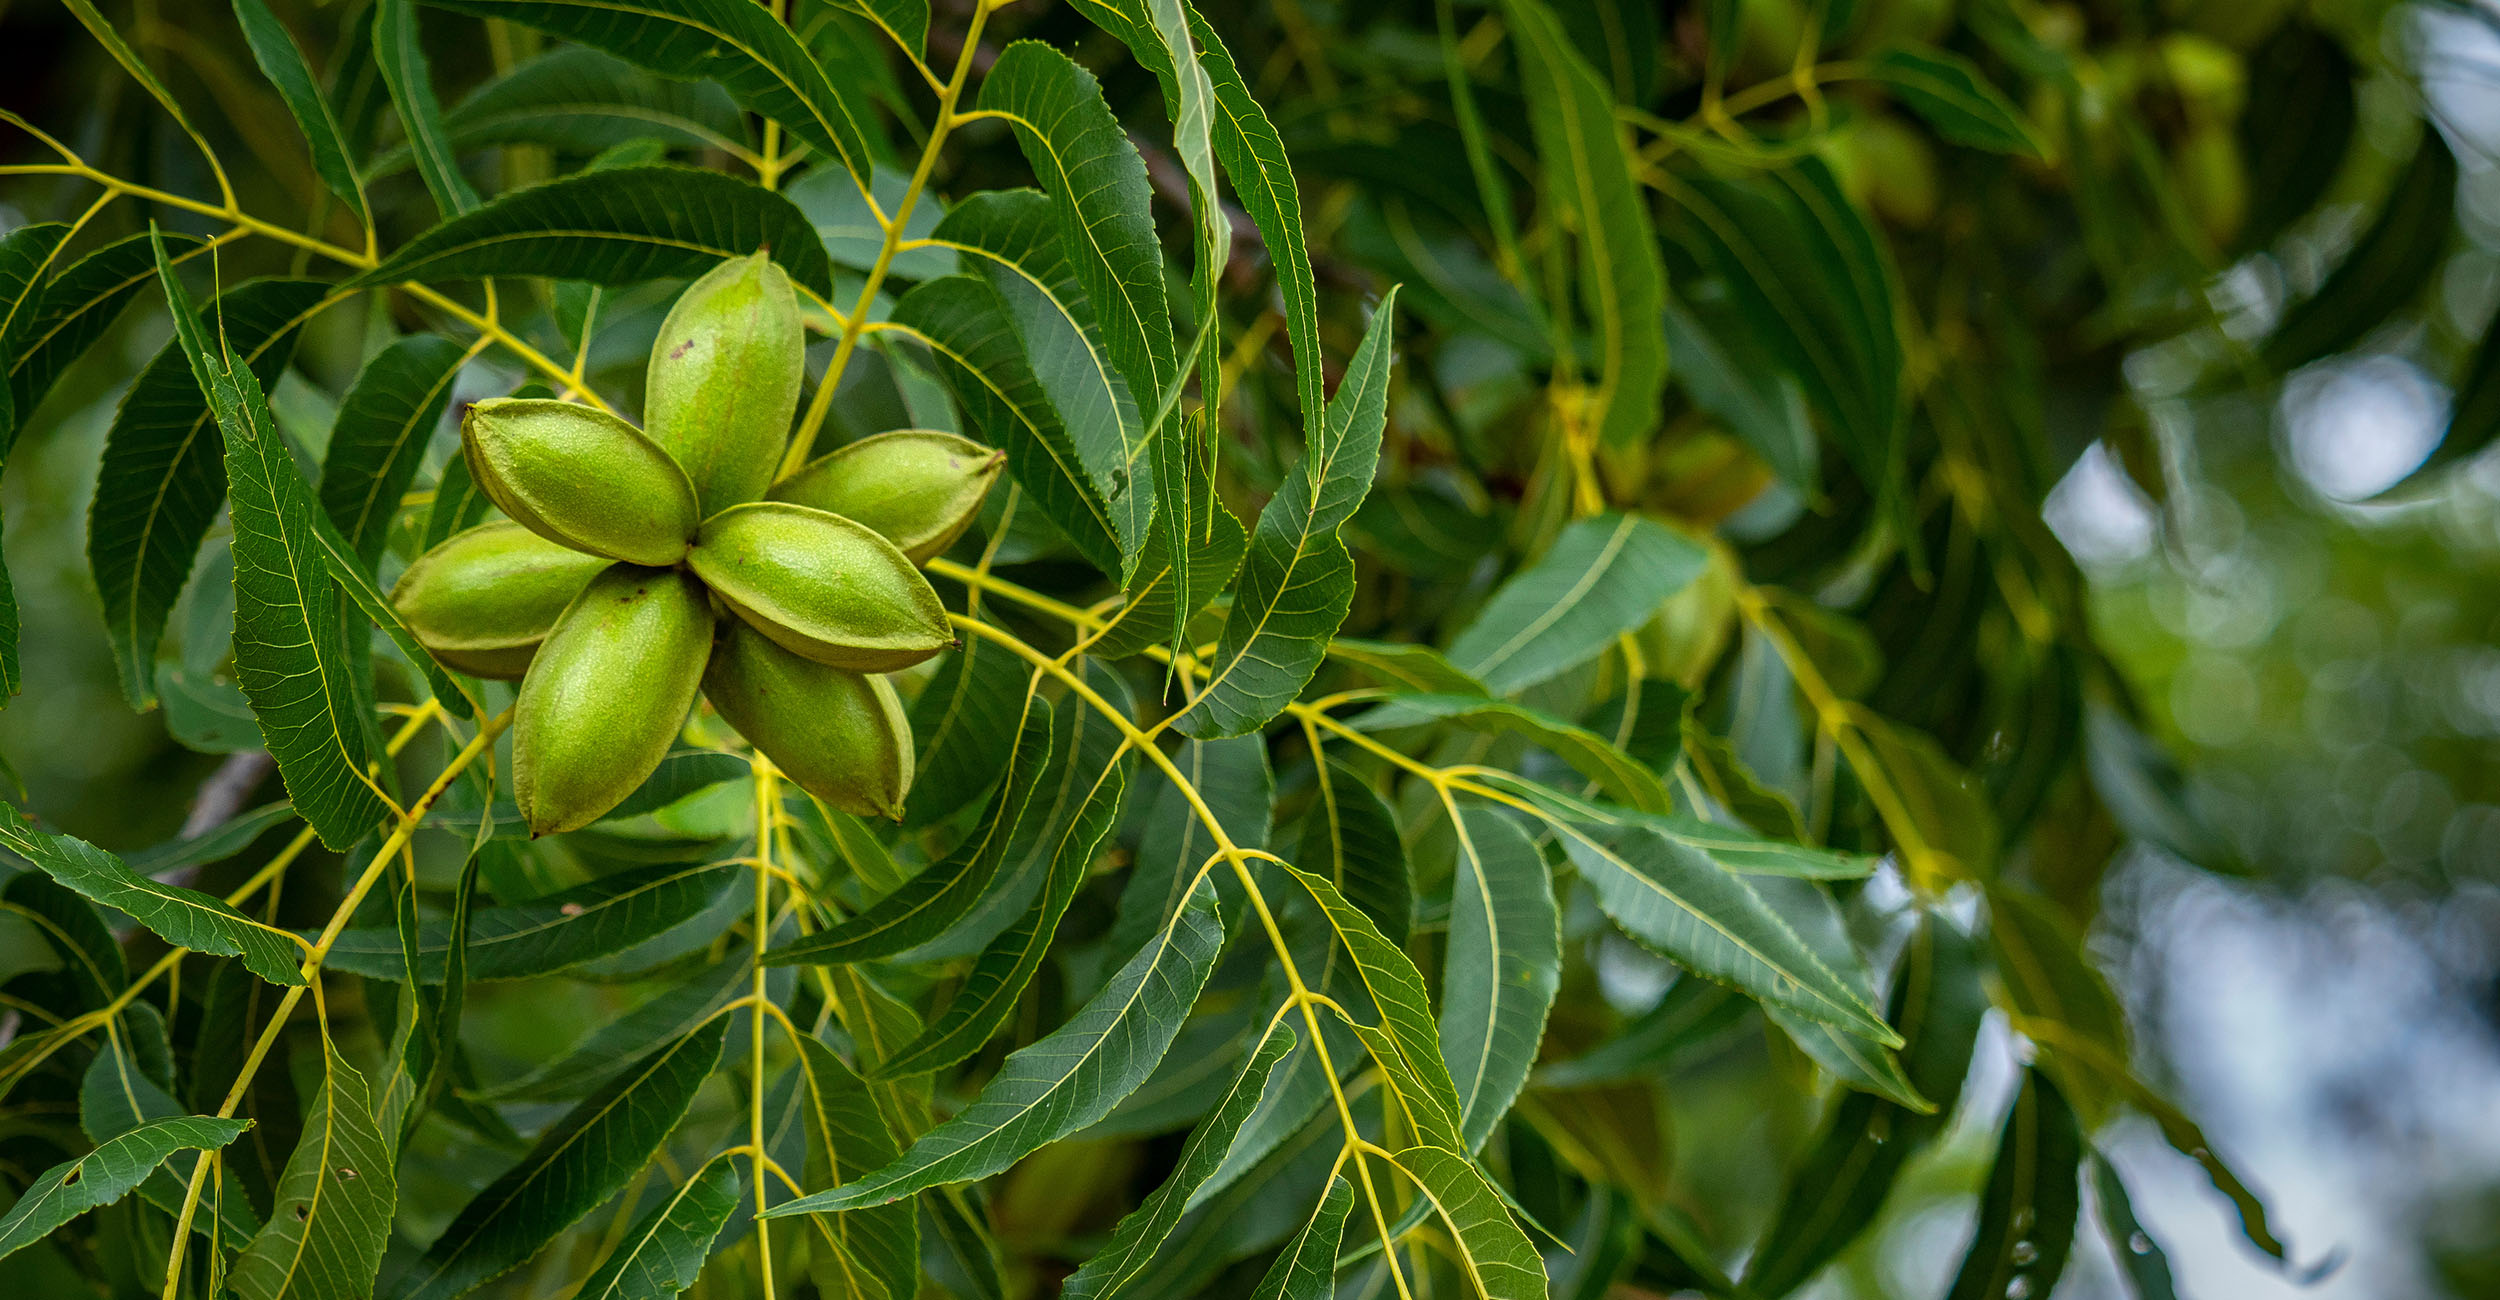 Cluster of pecans growing on a tree.